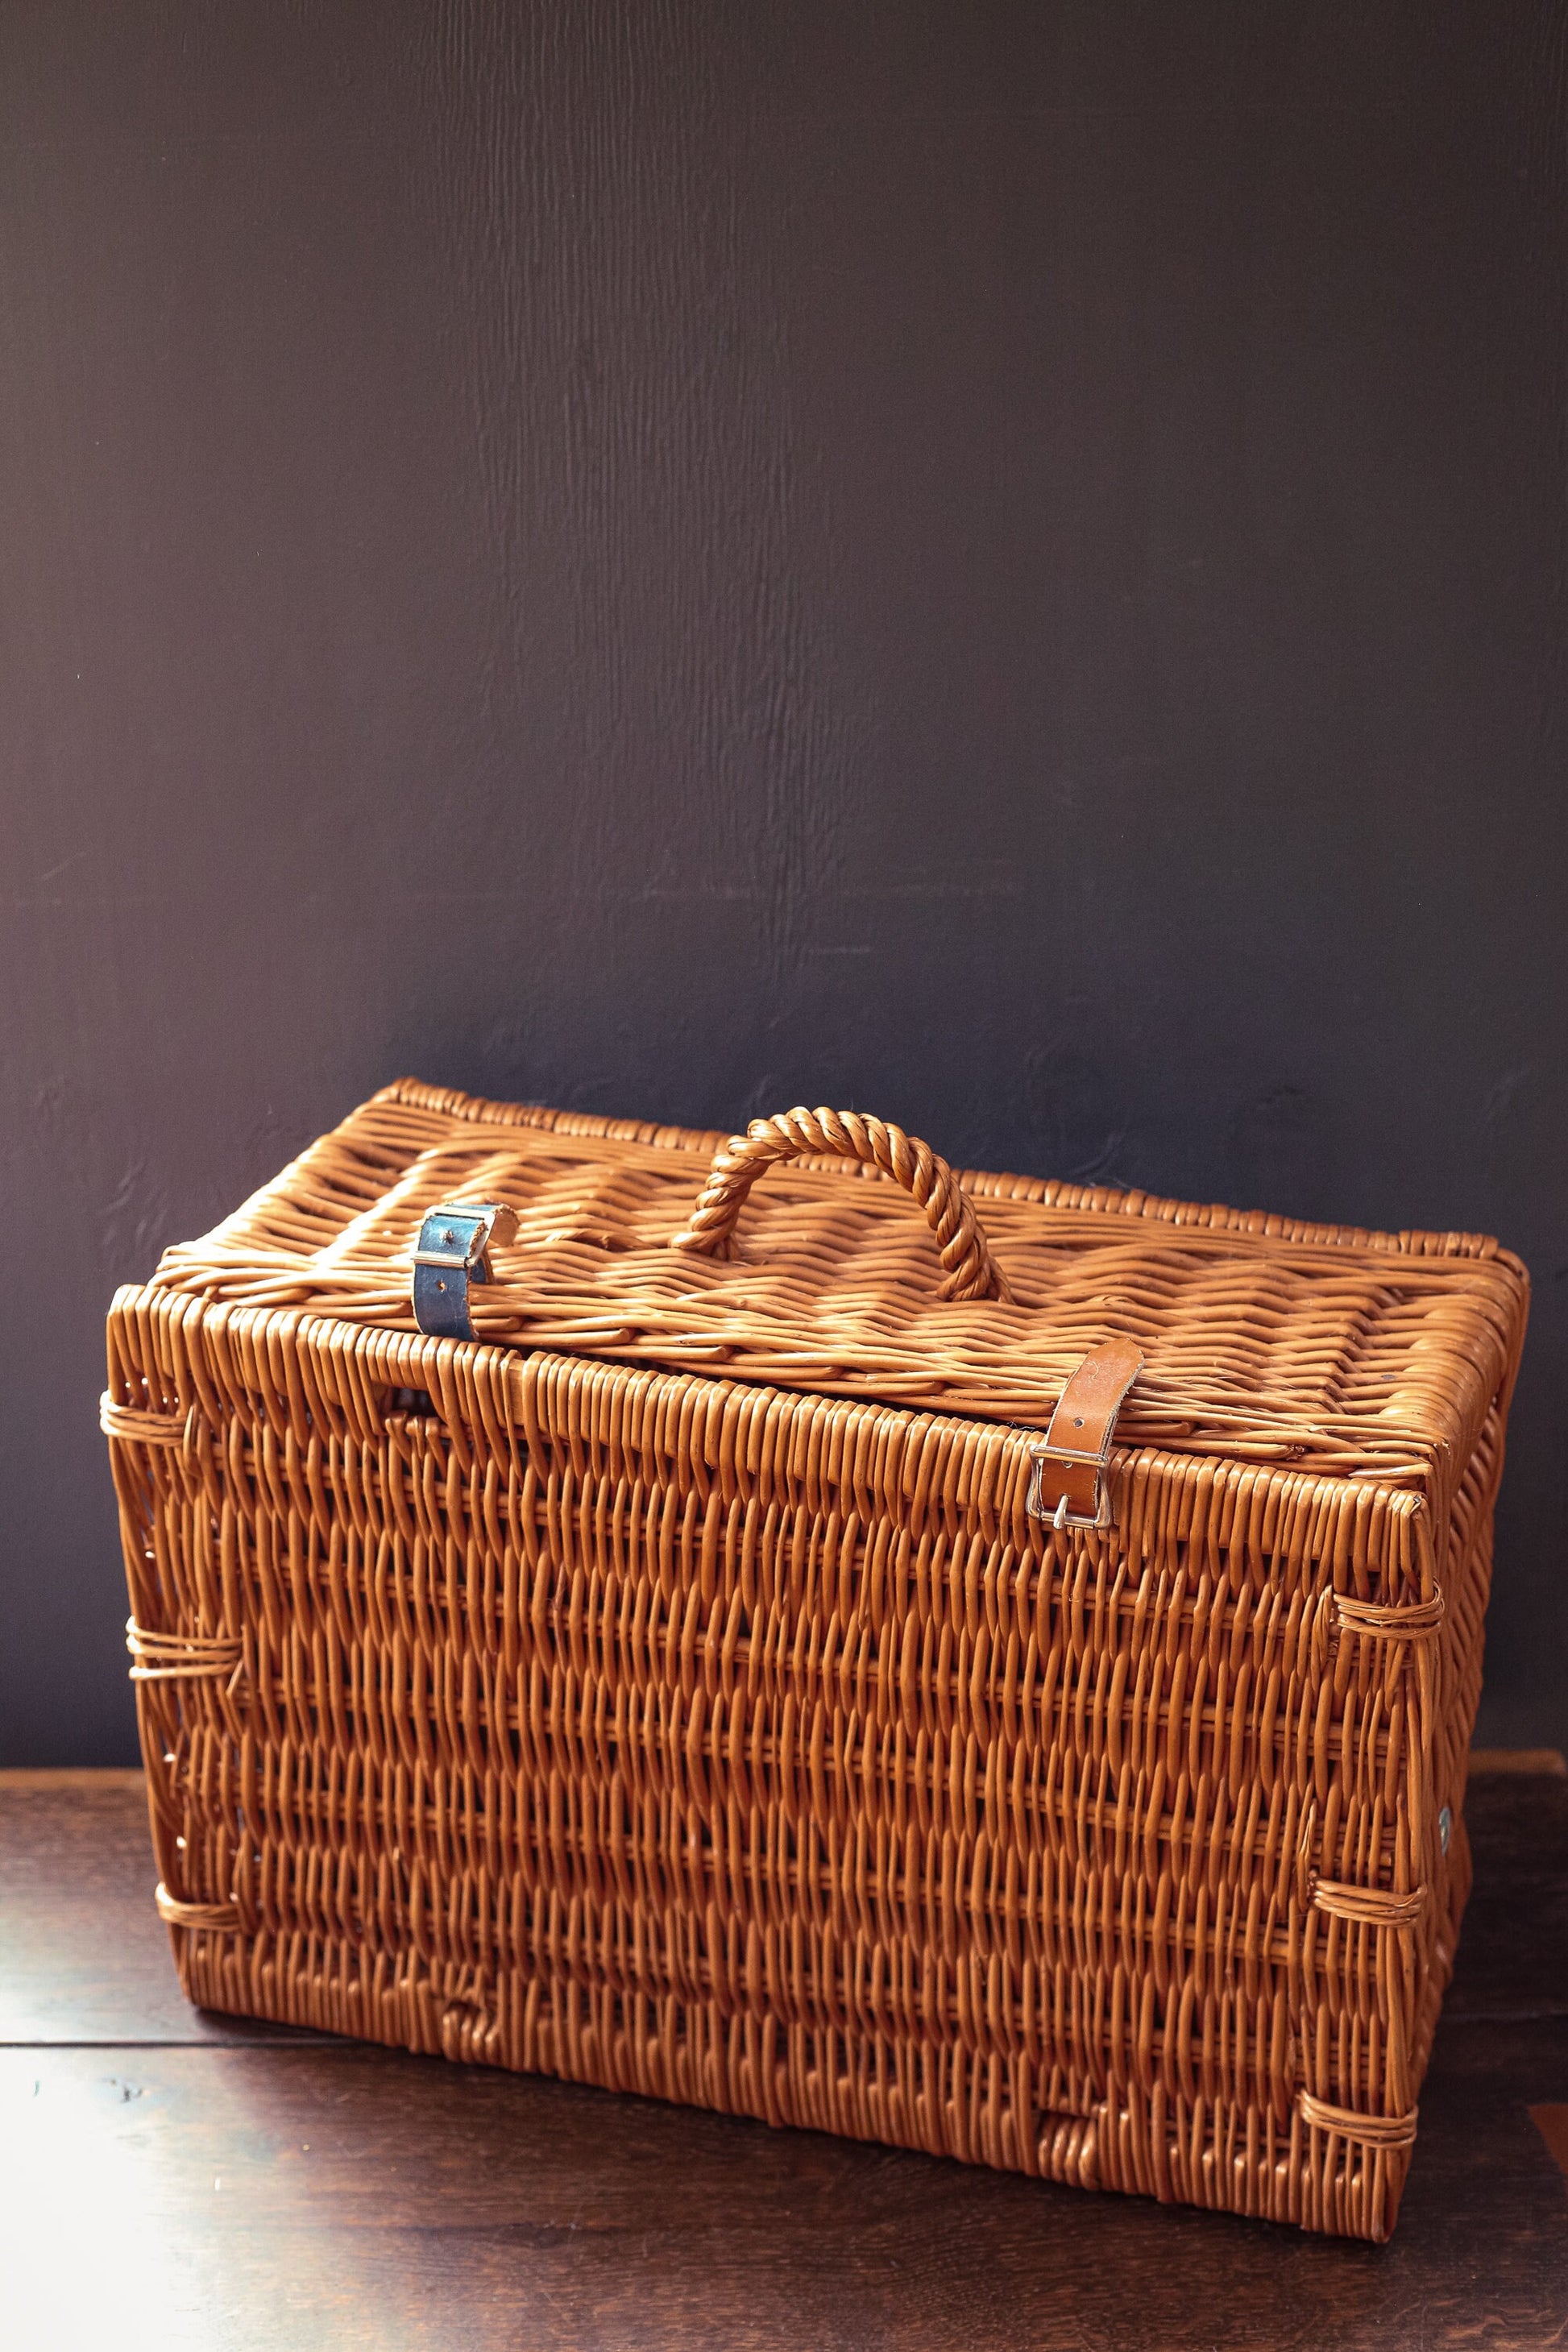 Large Wicker Rattan Picnic Basket with Organizer - Vintage Suitcase Style Picnic Basket with Handle